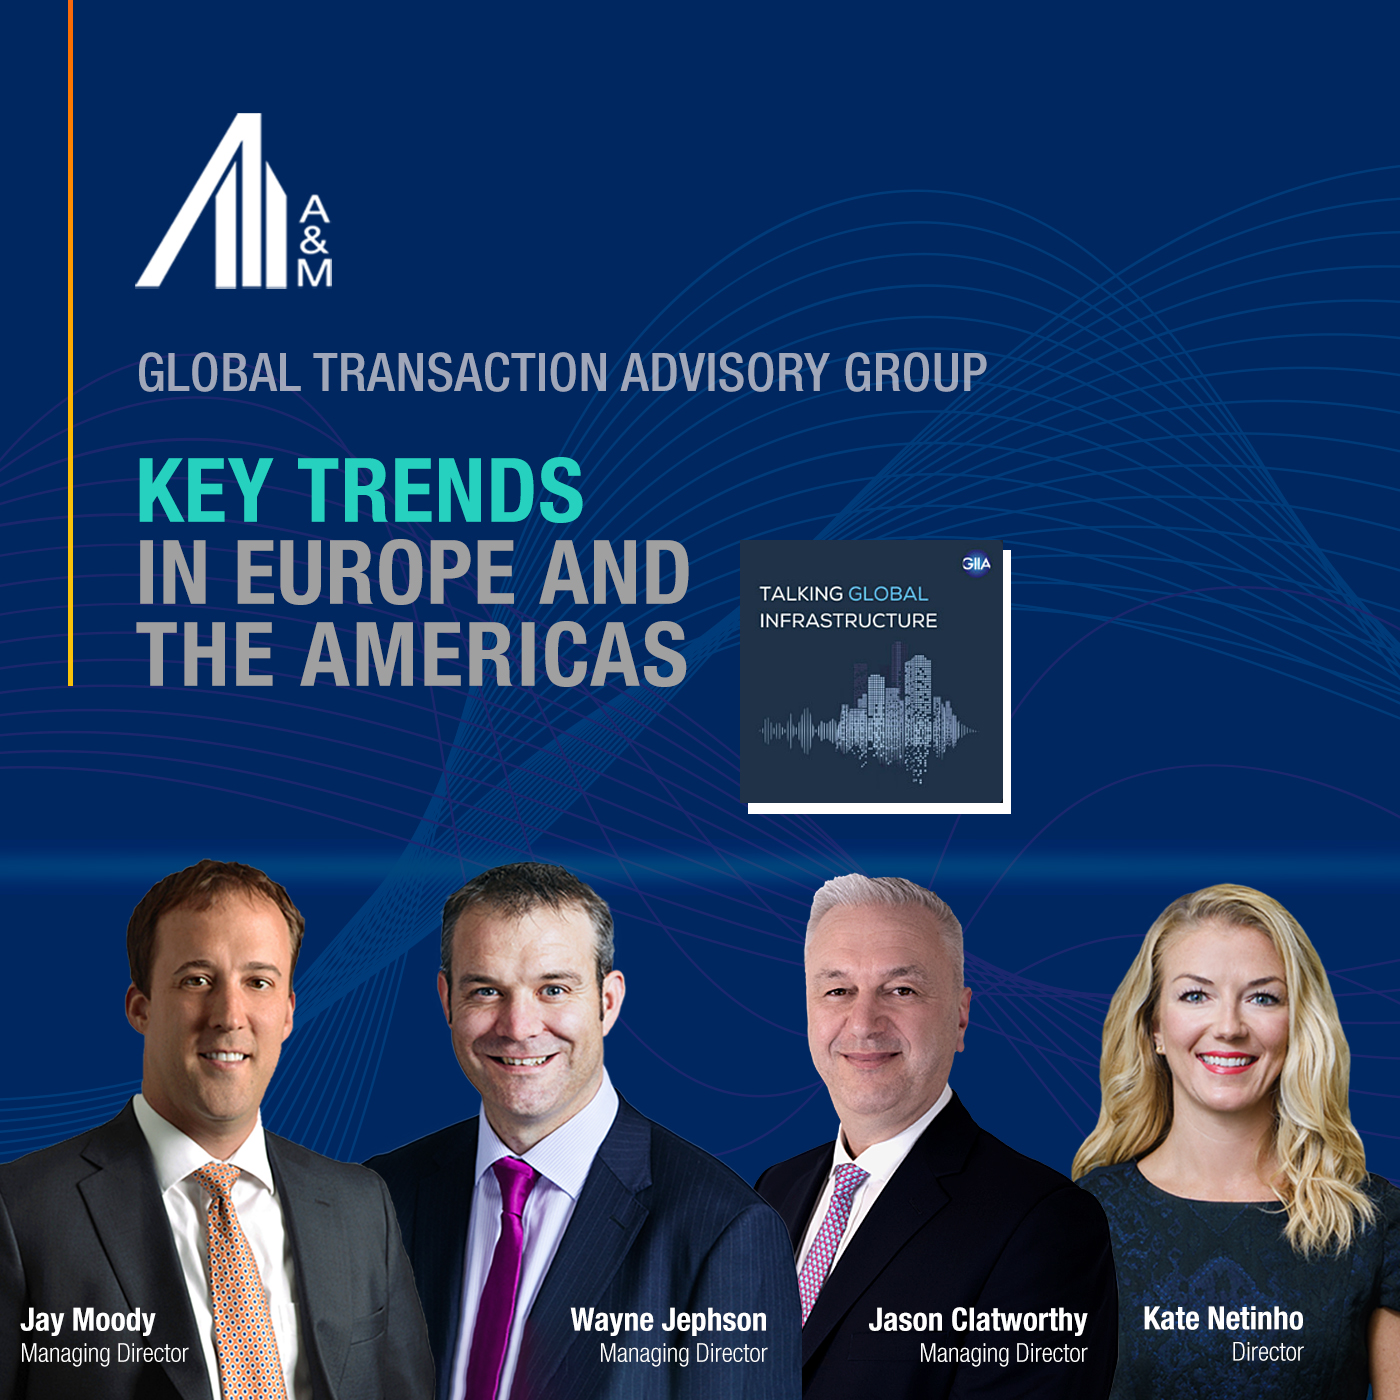 Key trends in Europe and the Americas